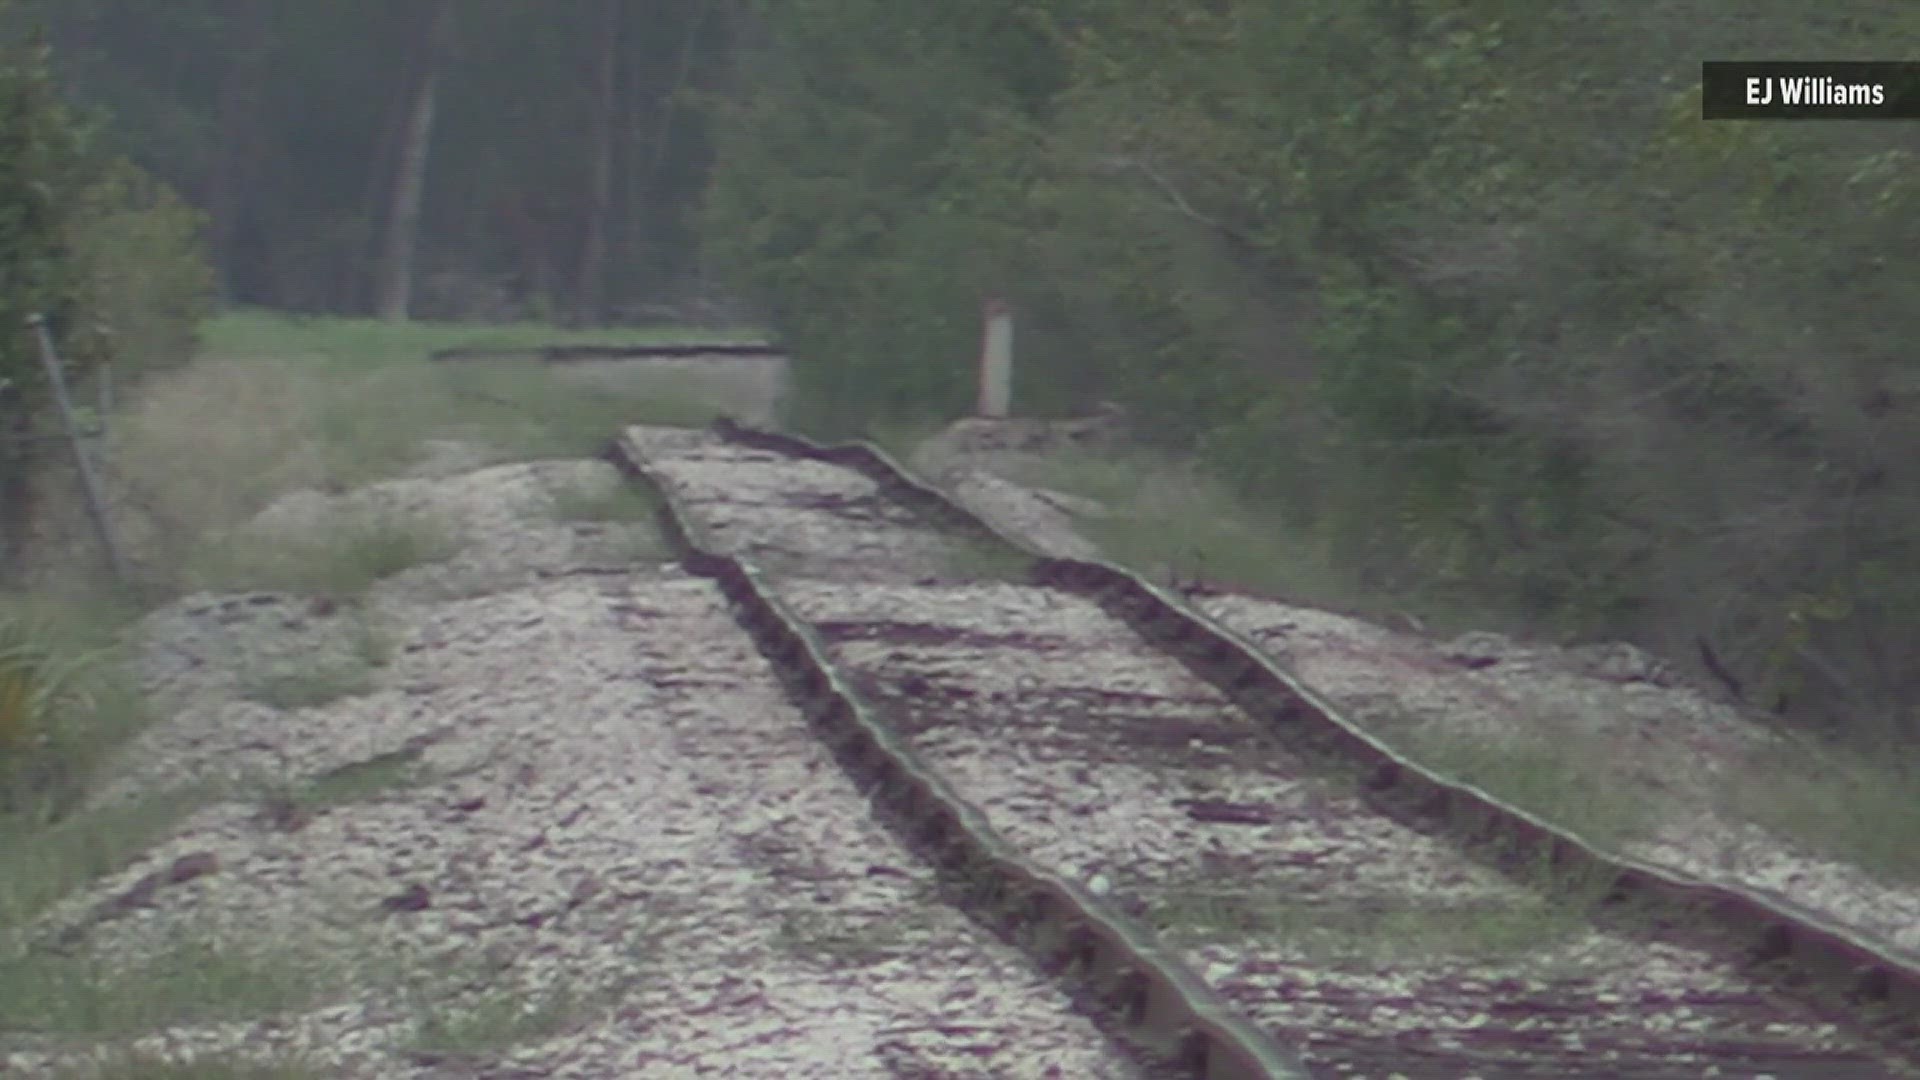 Her body was found near the train tracks close to the south truck entrance of International Paper.